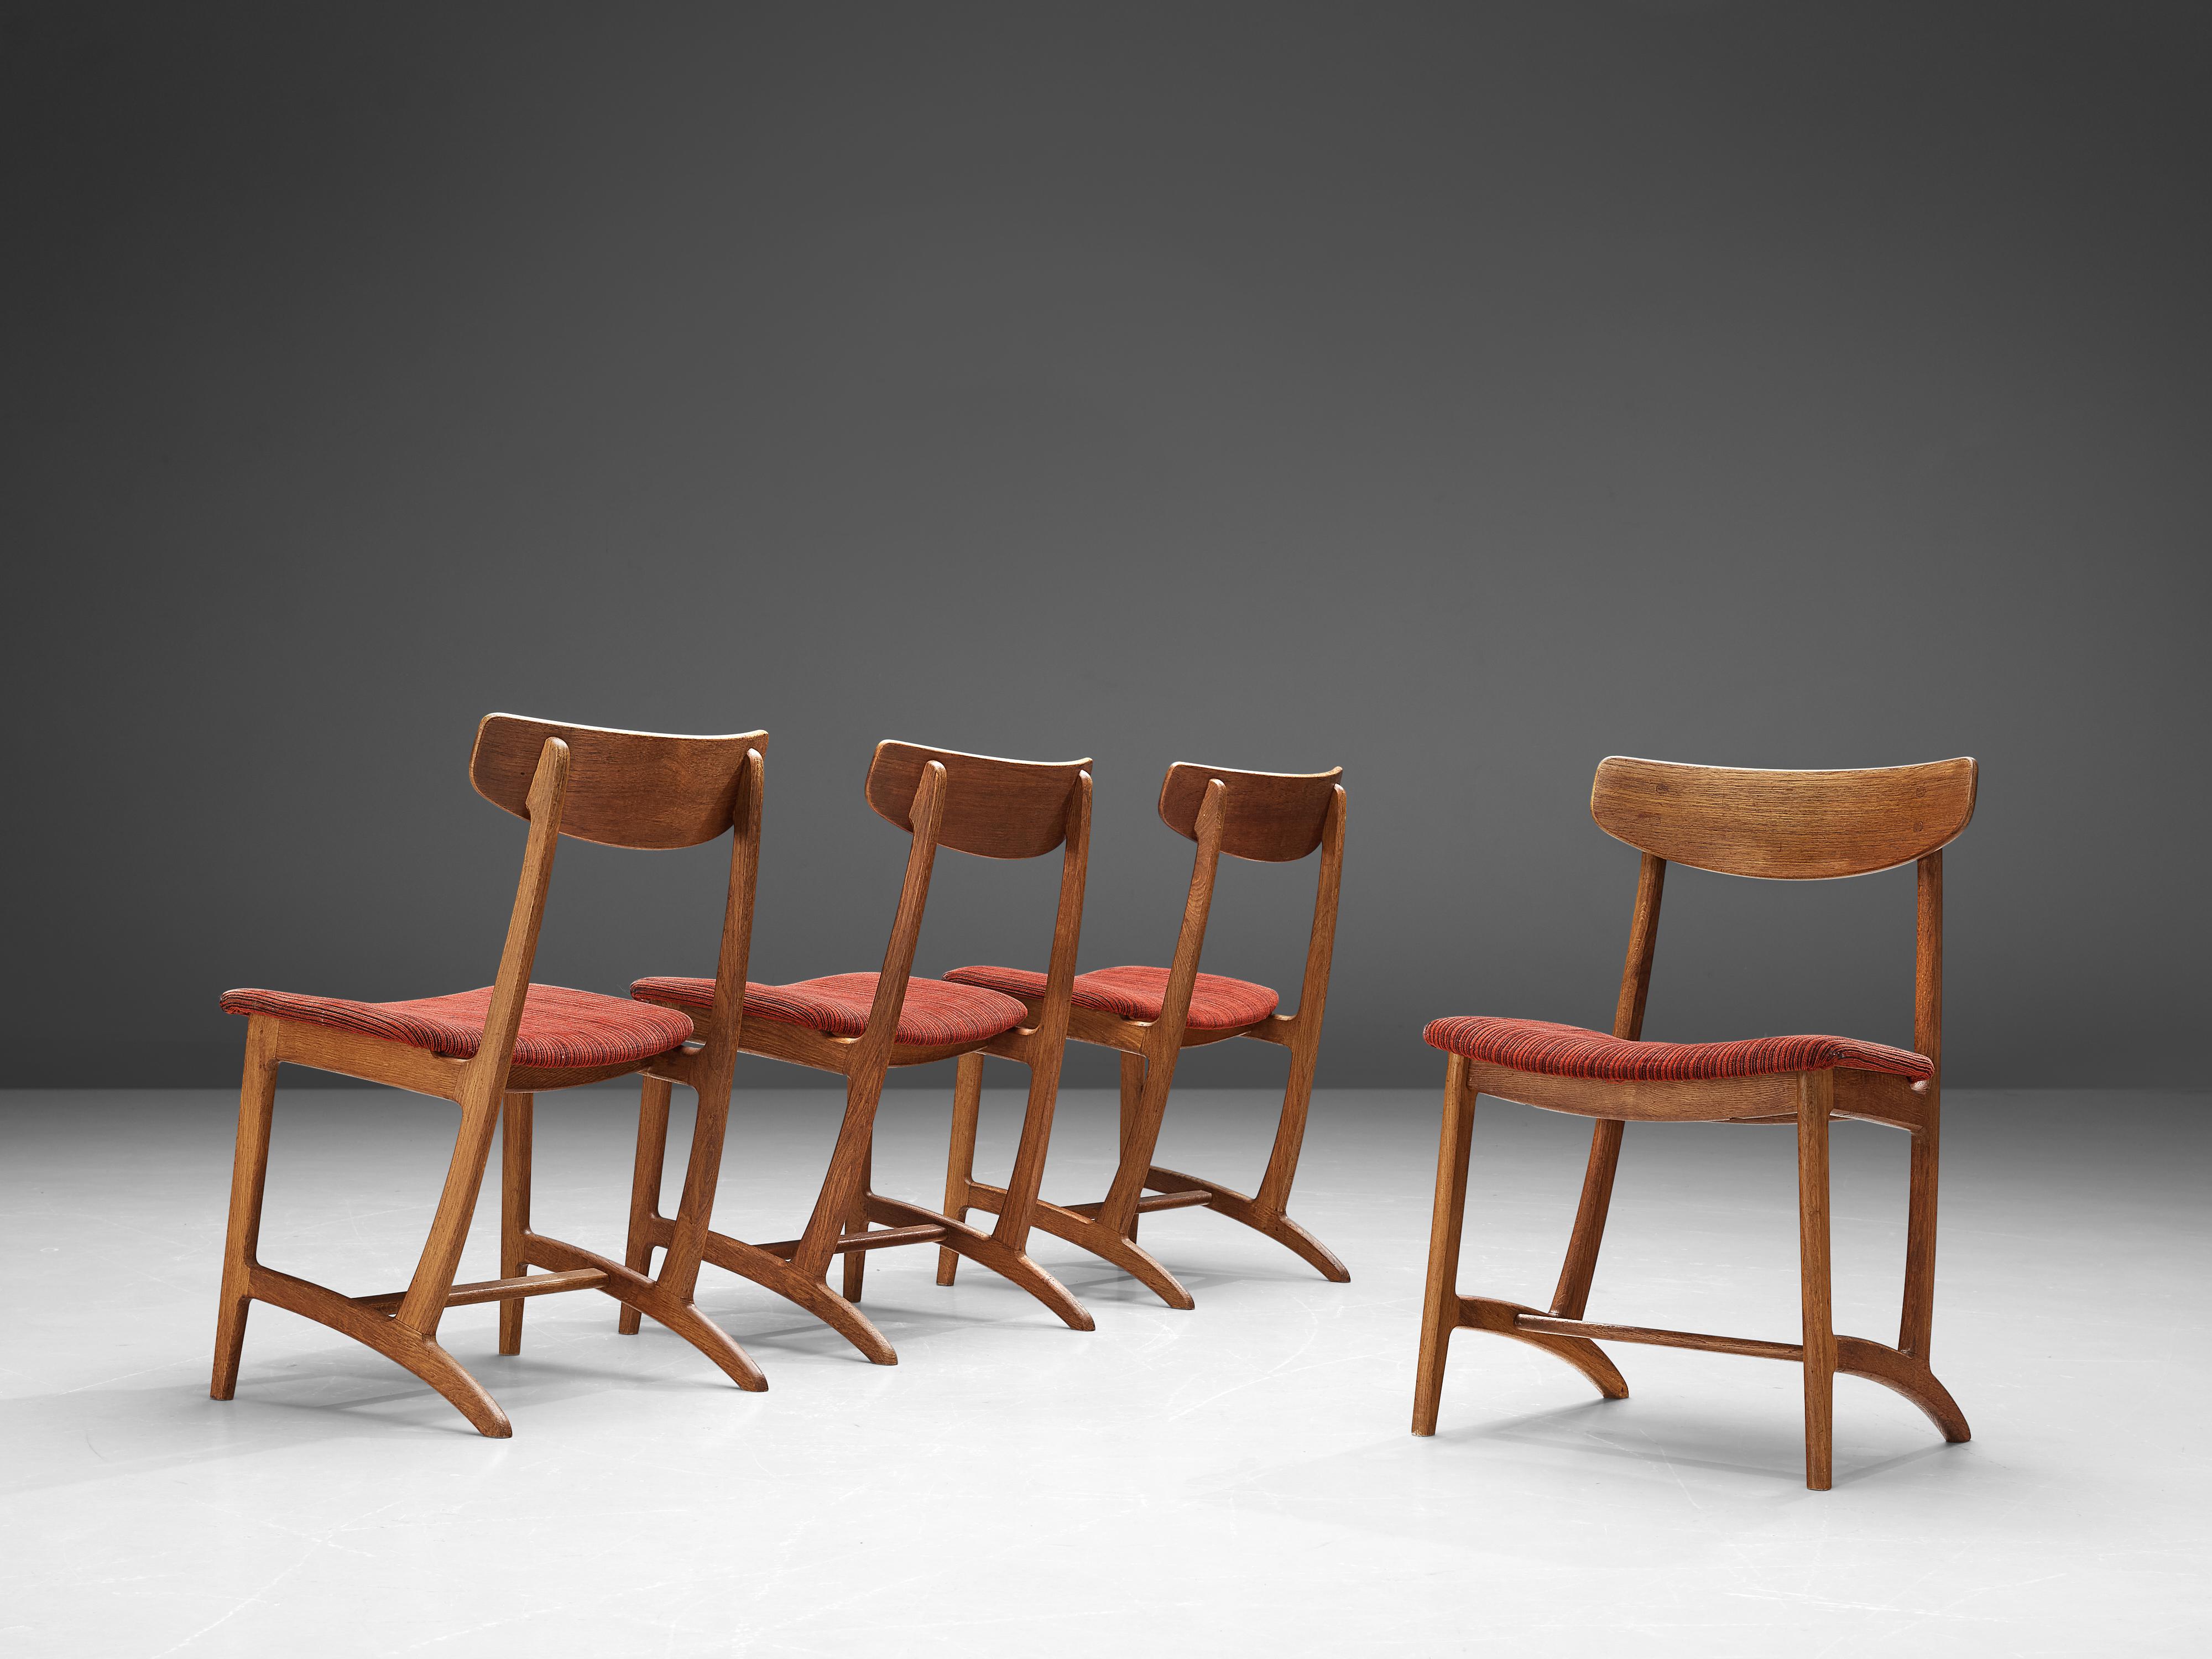 Illum Wikkelsø for Bordum & Nielsen, dining chairs model '55', oak, teak, fabric, Denmark, designed in 1955

This striking set of dining chairs is a perfect example of Scandinavian design. The frame is made out of oak while the backseat is